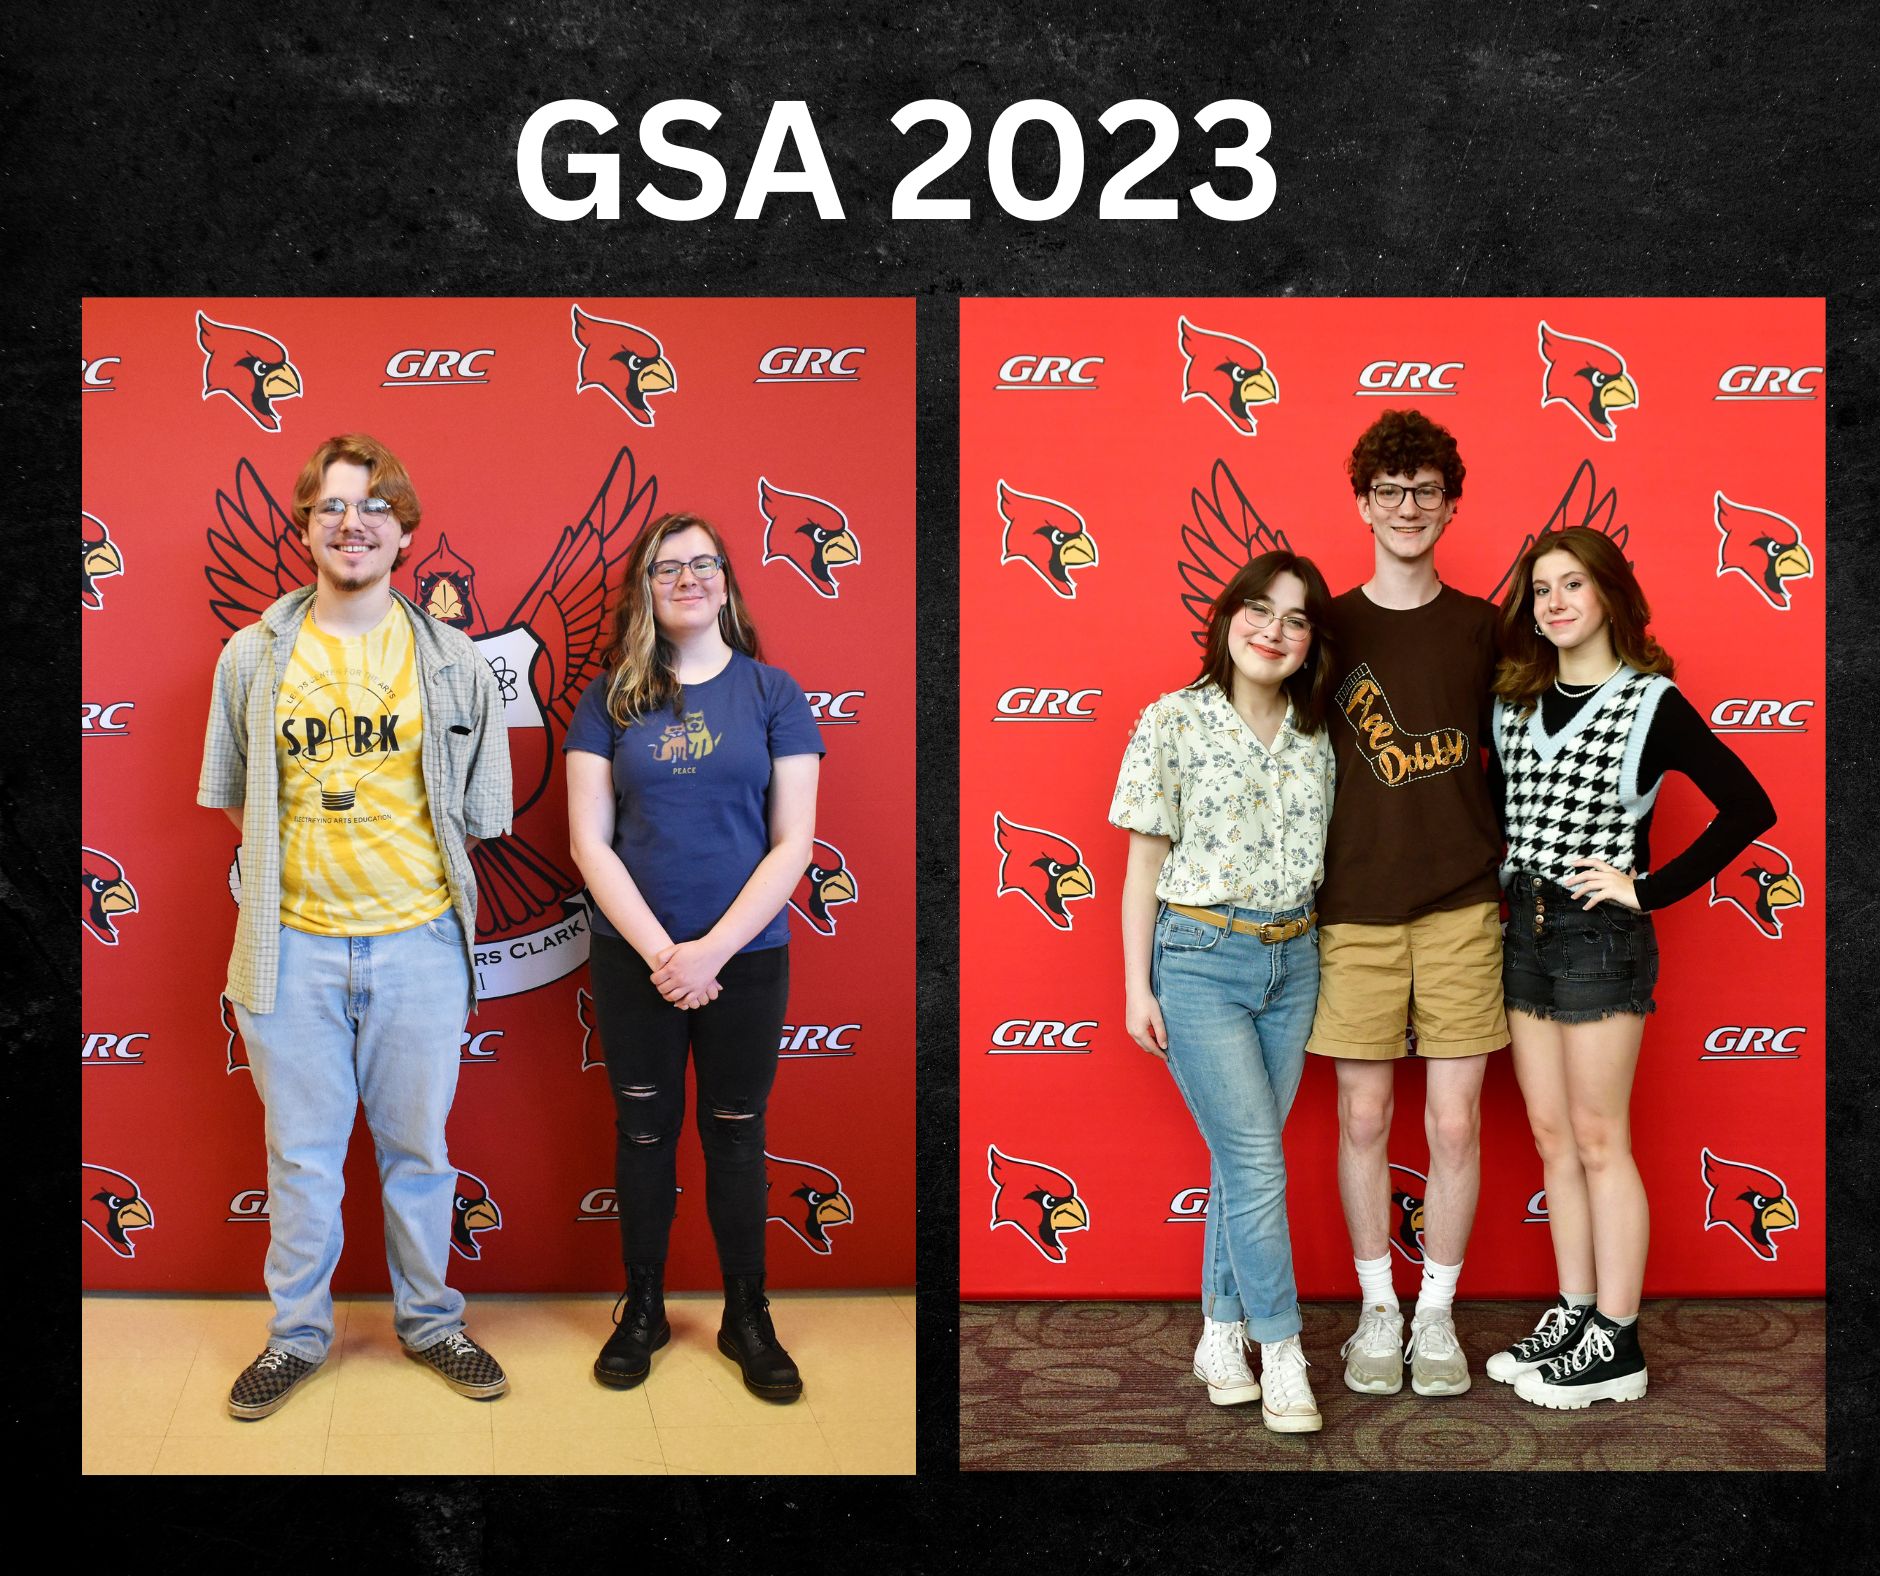 GSA offers opportunities in the arts